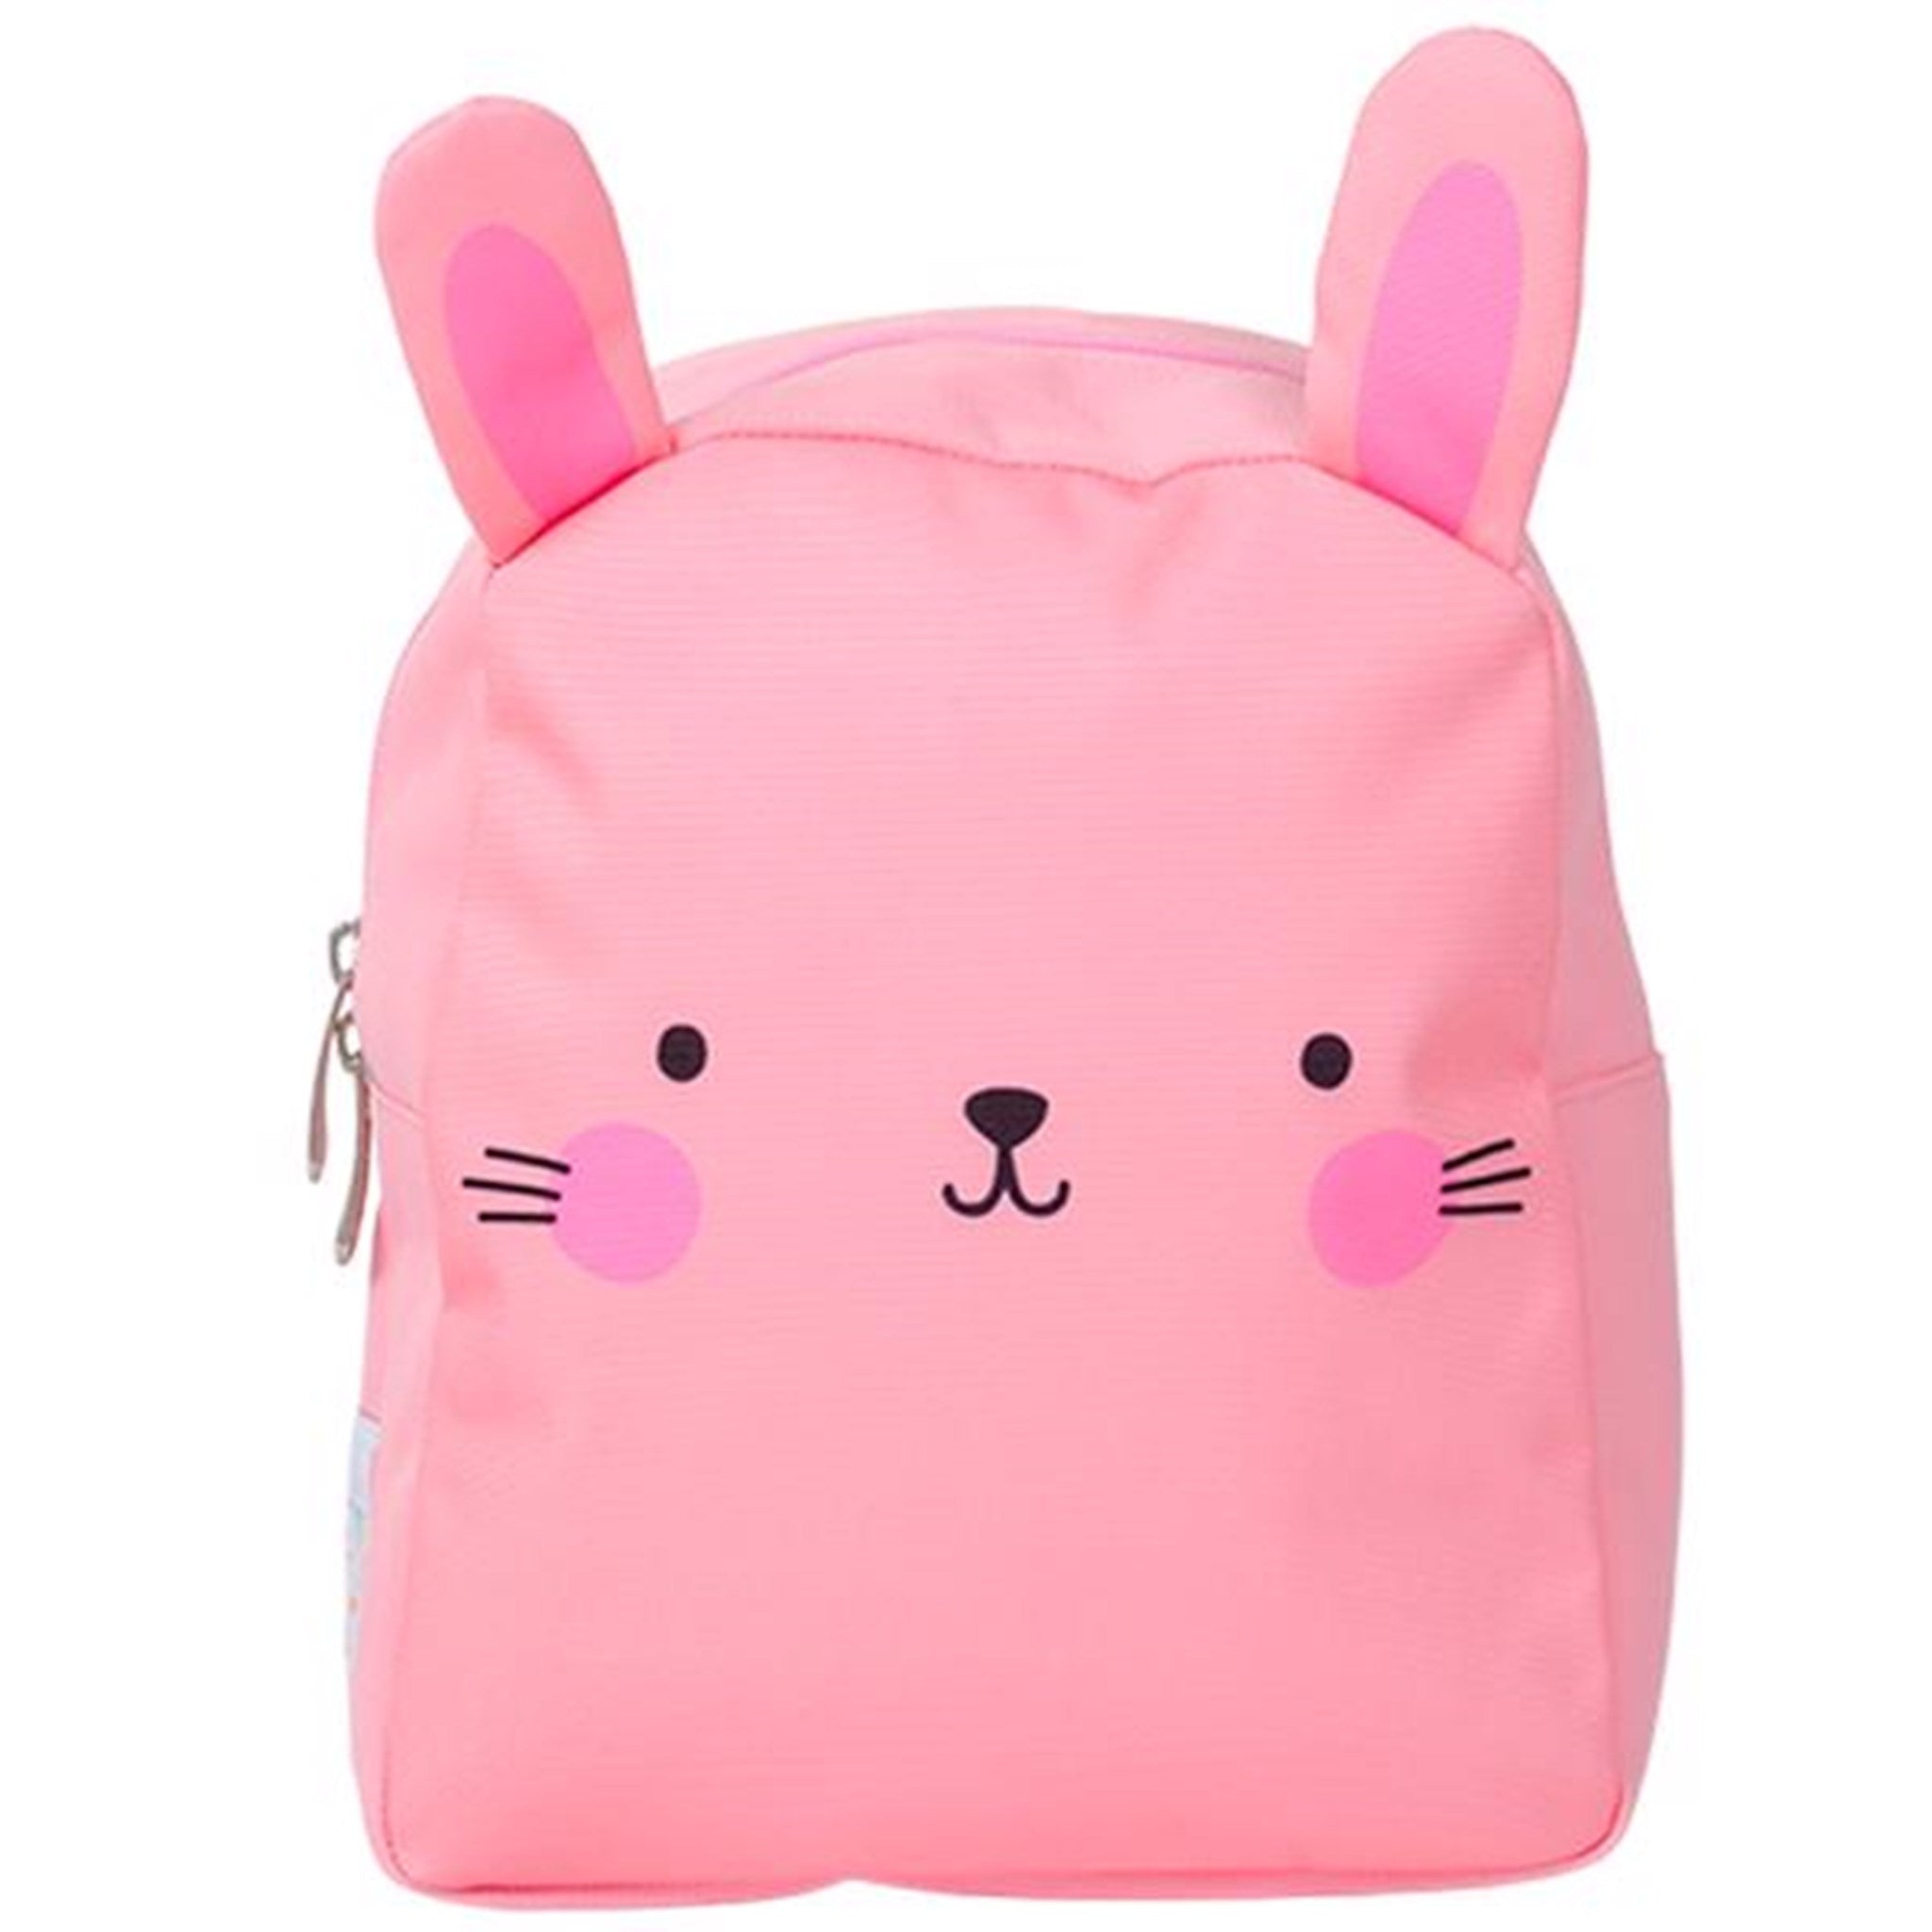 A Little Lovely Company Backpack Bunny